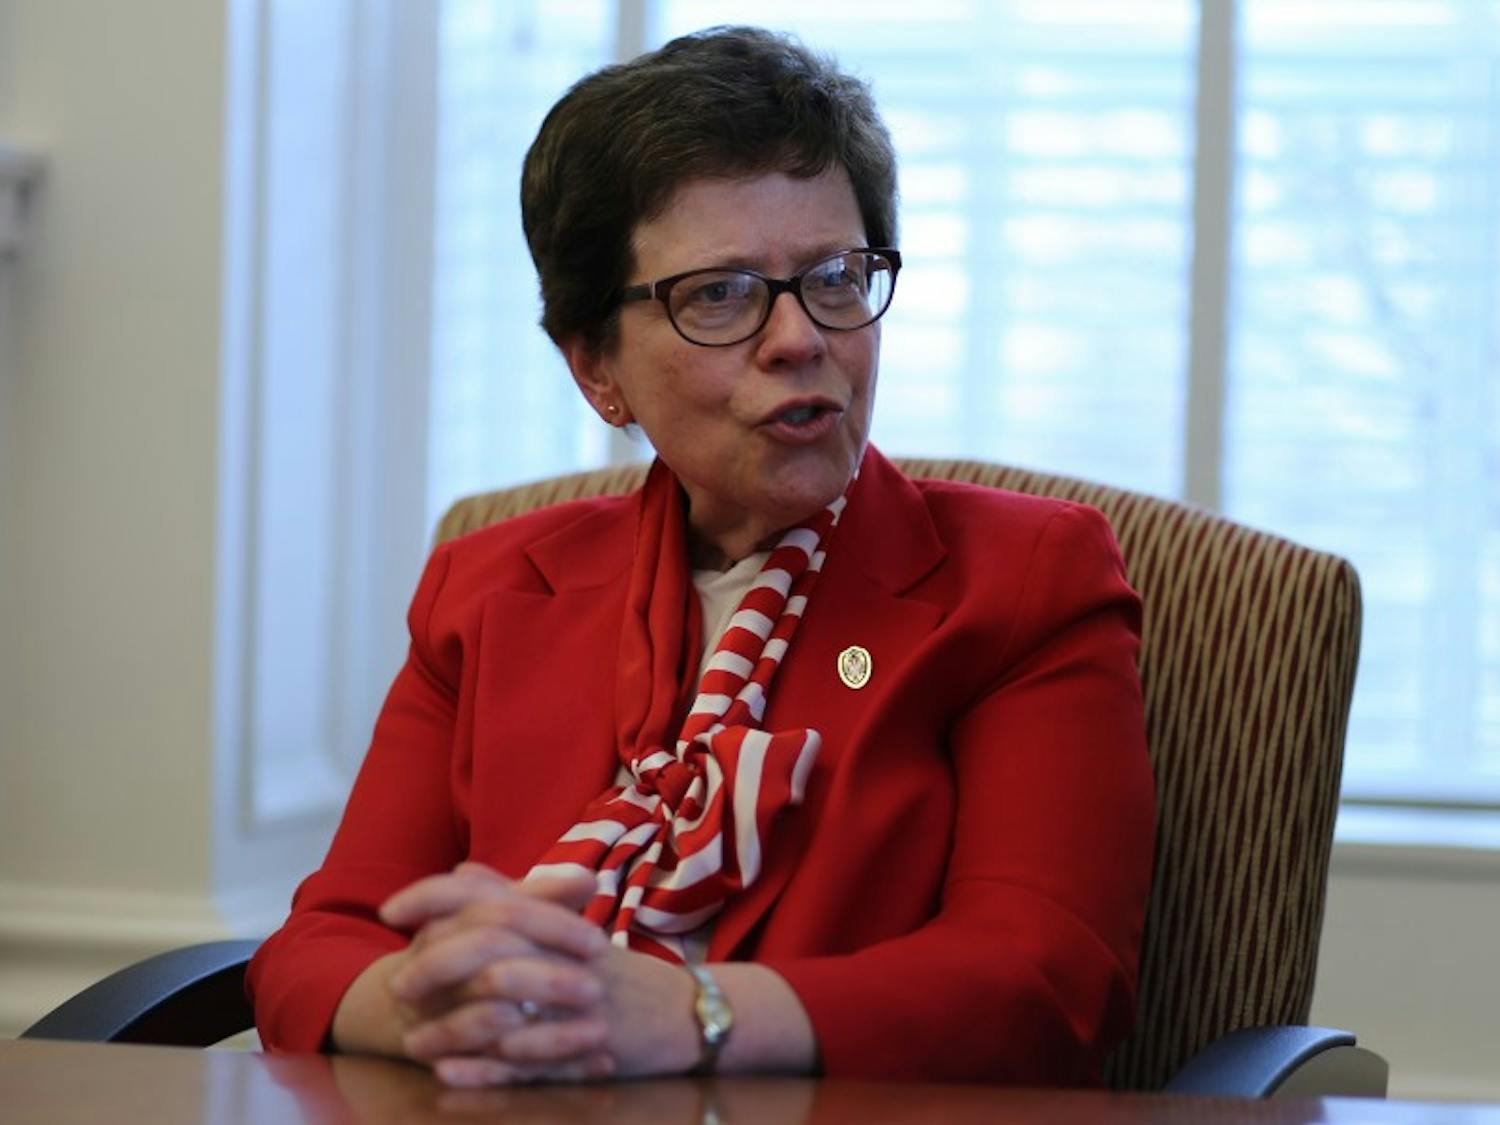 A new UW-Madison directory, announced Monday by Chancellor Rebecca Blank,&nbsp;aims to make it easier for researchers to access databases, technologies and contact information.